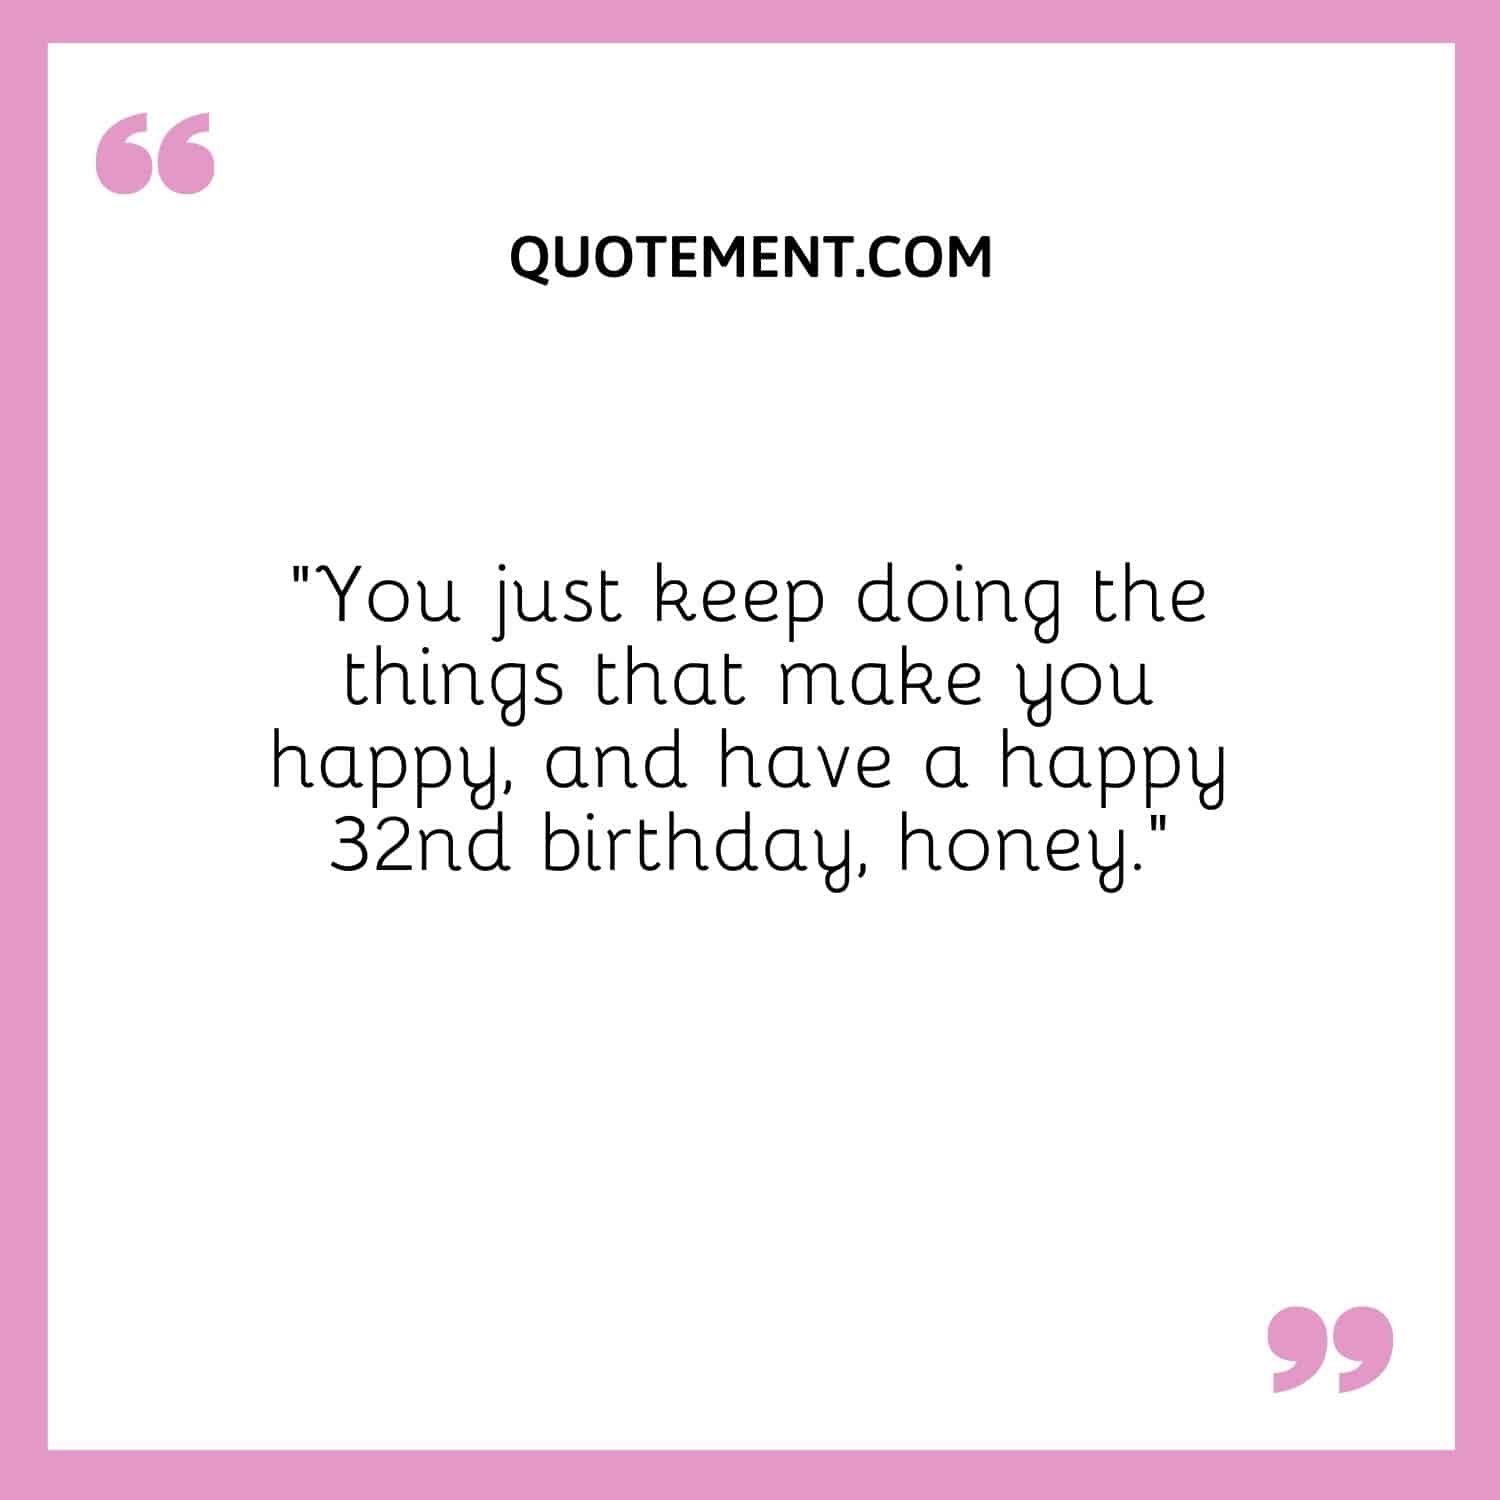 “You just keep doing the things that make you happy, and have a happy 32nd birthday, honey.”